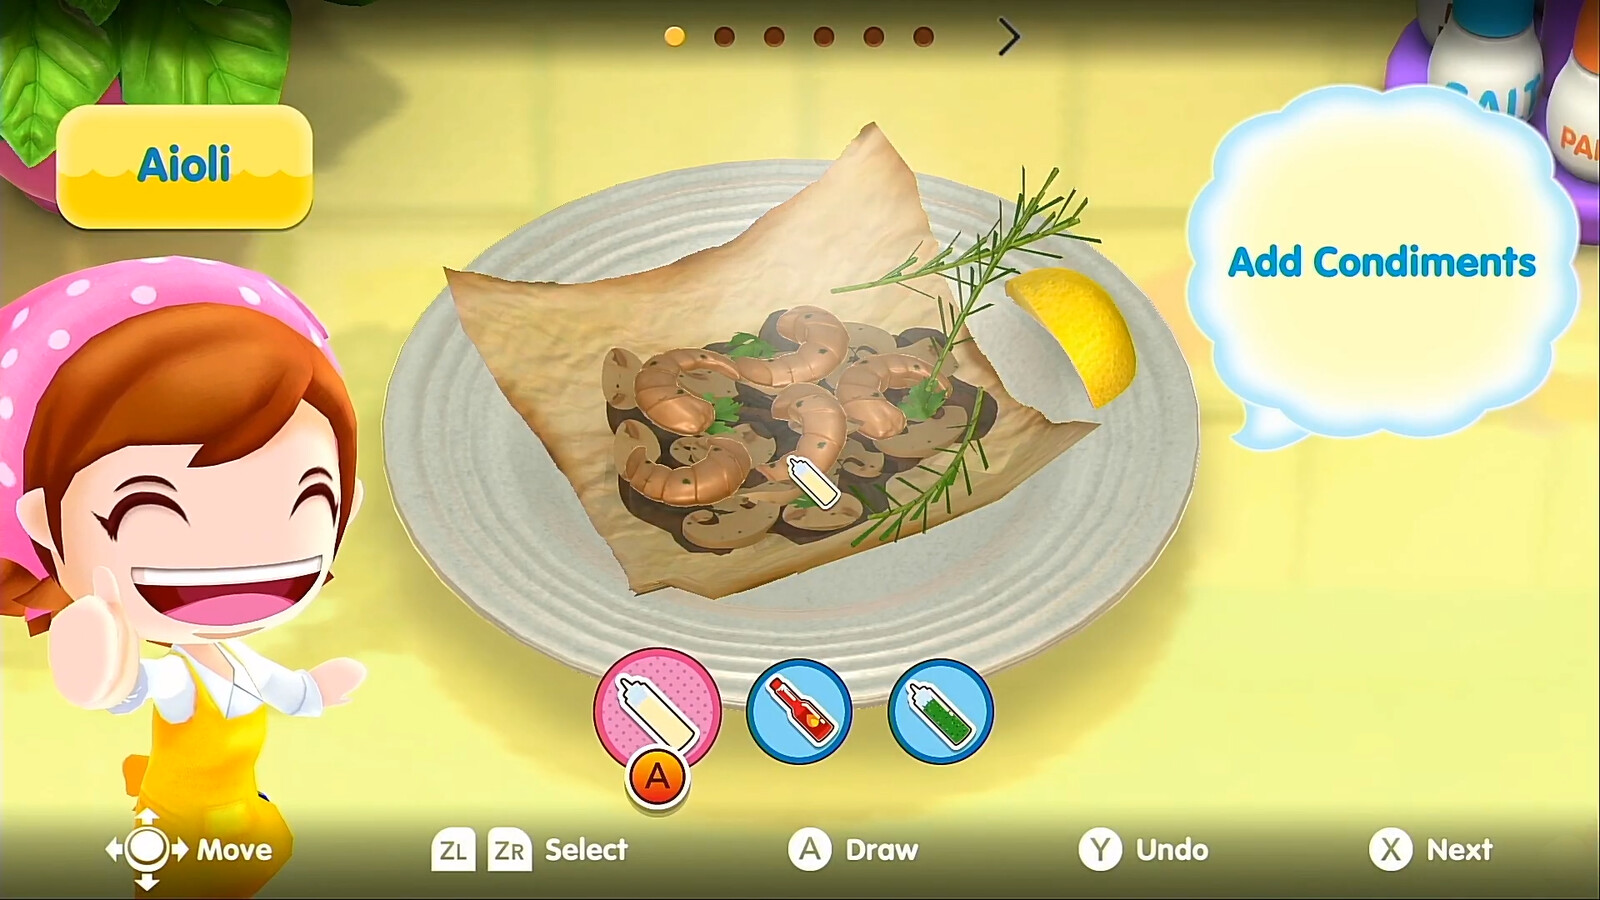 I setup this final plating for the Mushrooms en Papillote dish. Some assets were already created for other dishes/minigames like the shrimp and rosemary, some assets were original like the sauce puddle and crinkled paper wrapping.